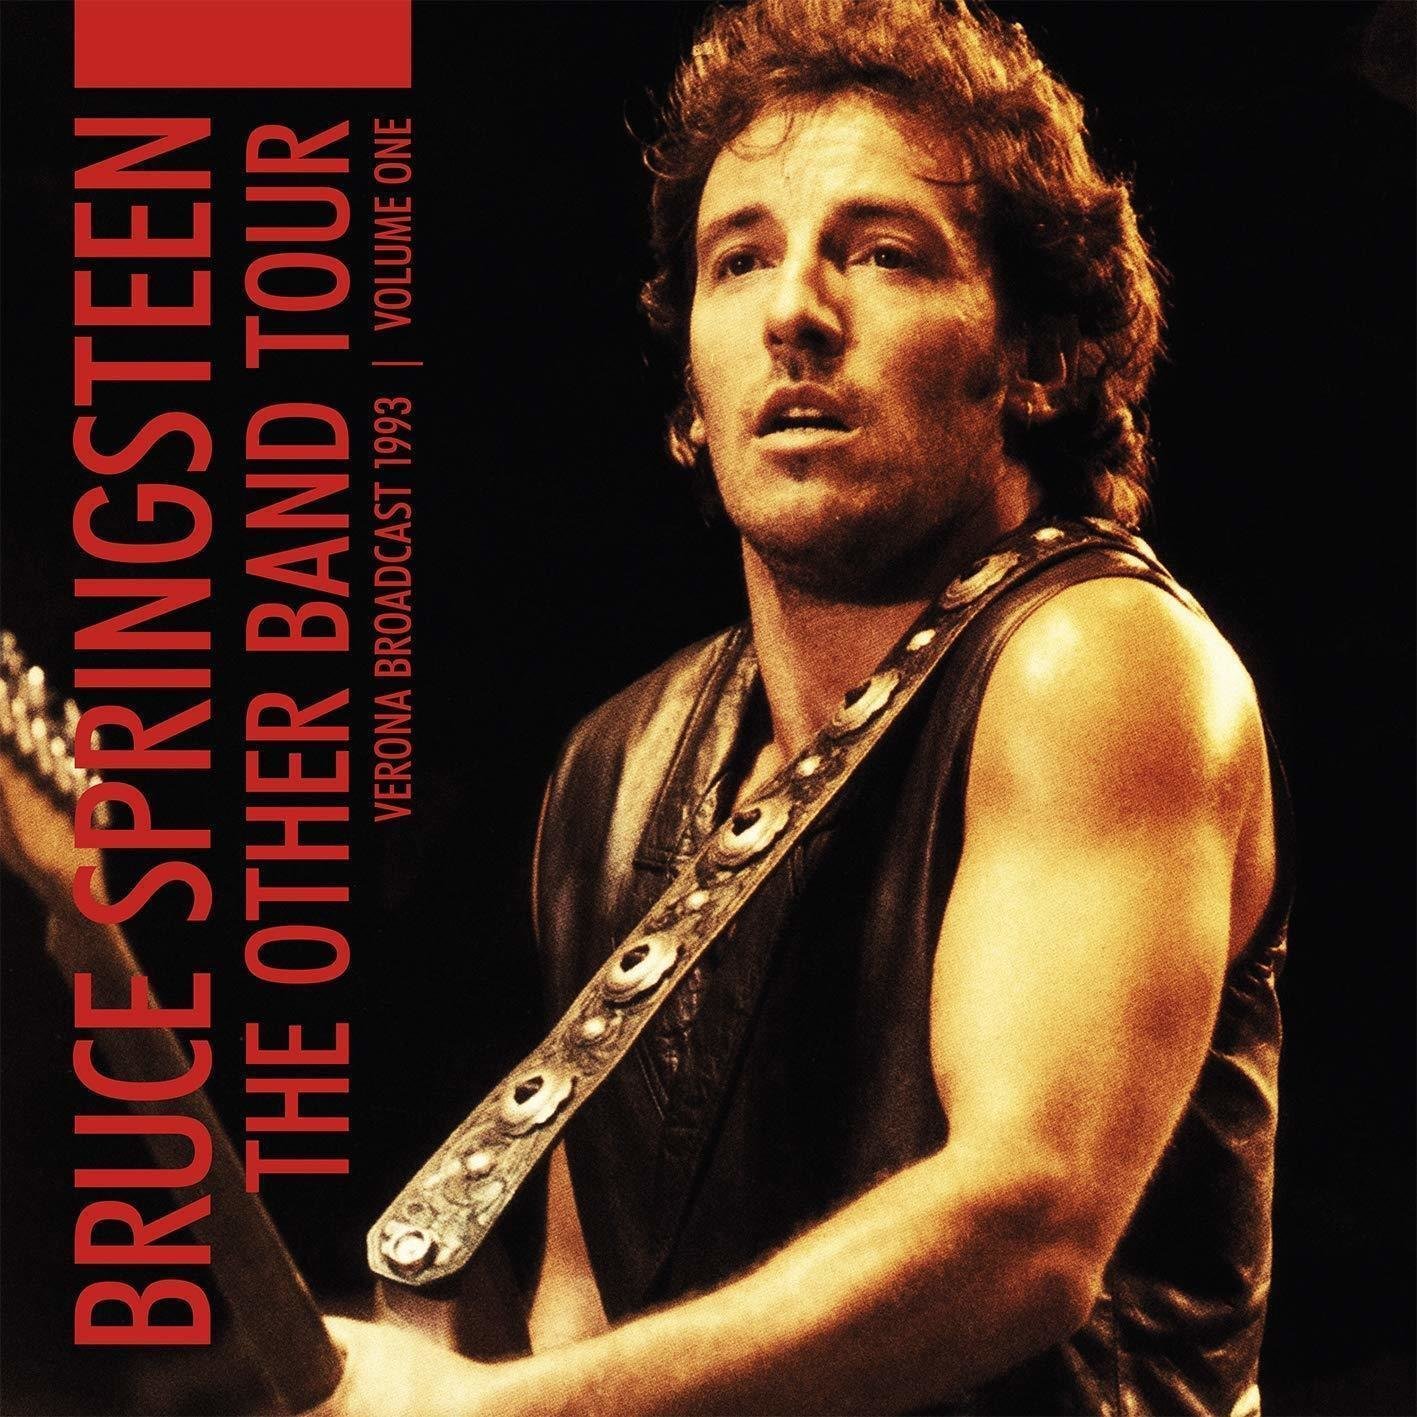 Hanglemez Bruce Springsteen - The Other Band Tour - Verona Broadcast 1993 - Volume One (2 LP)